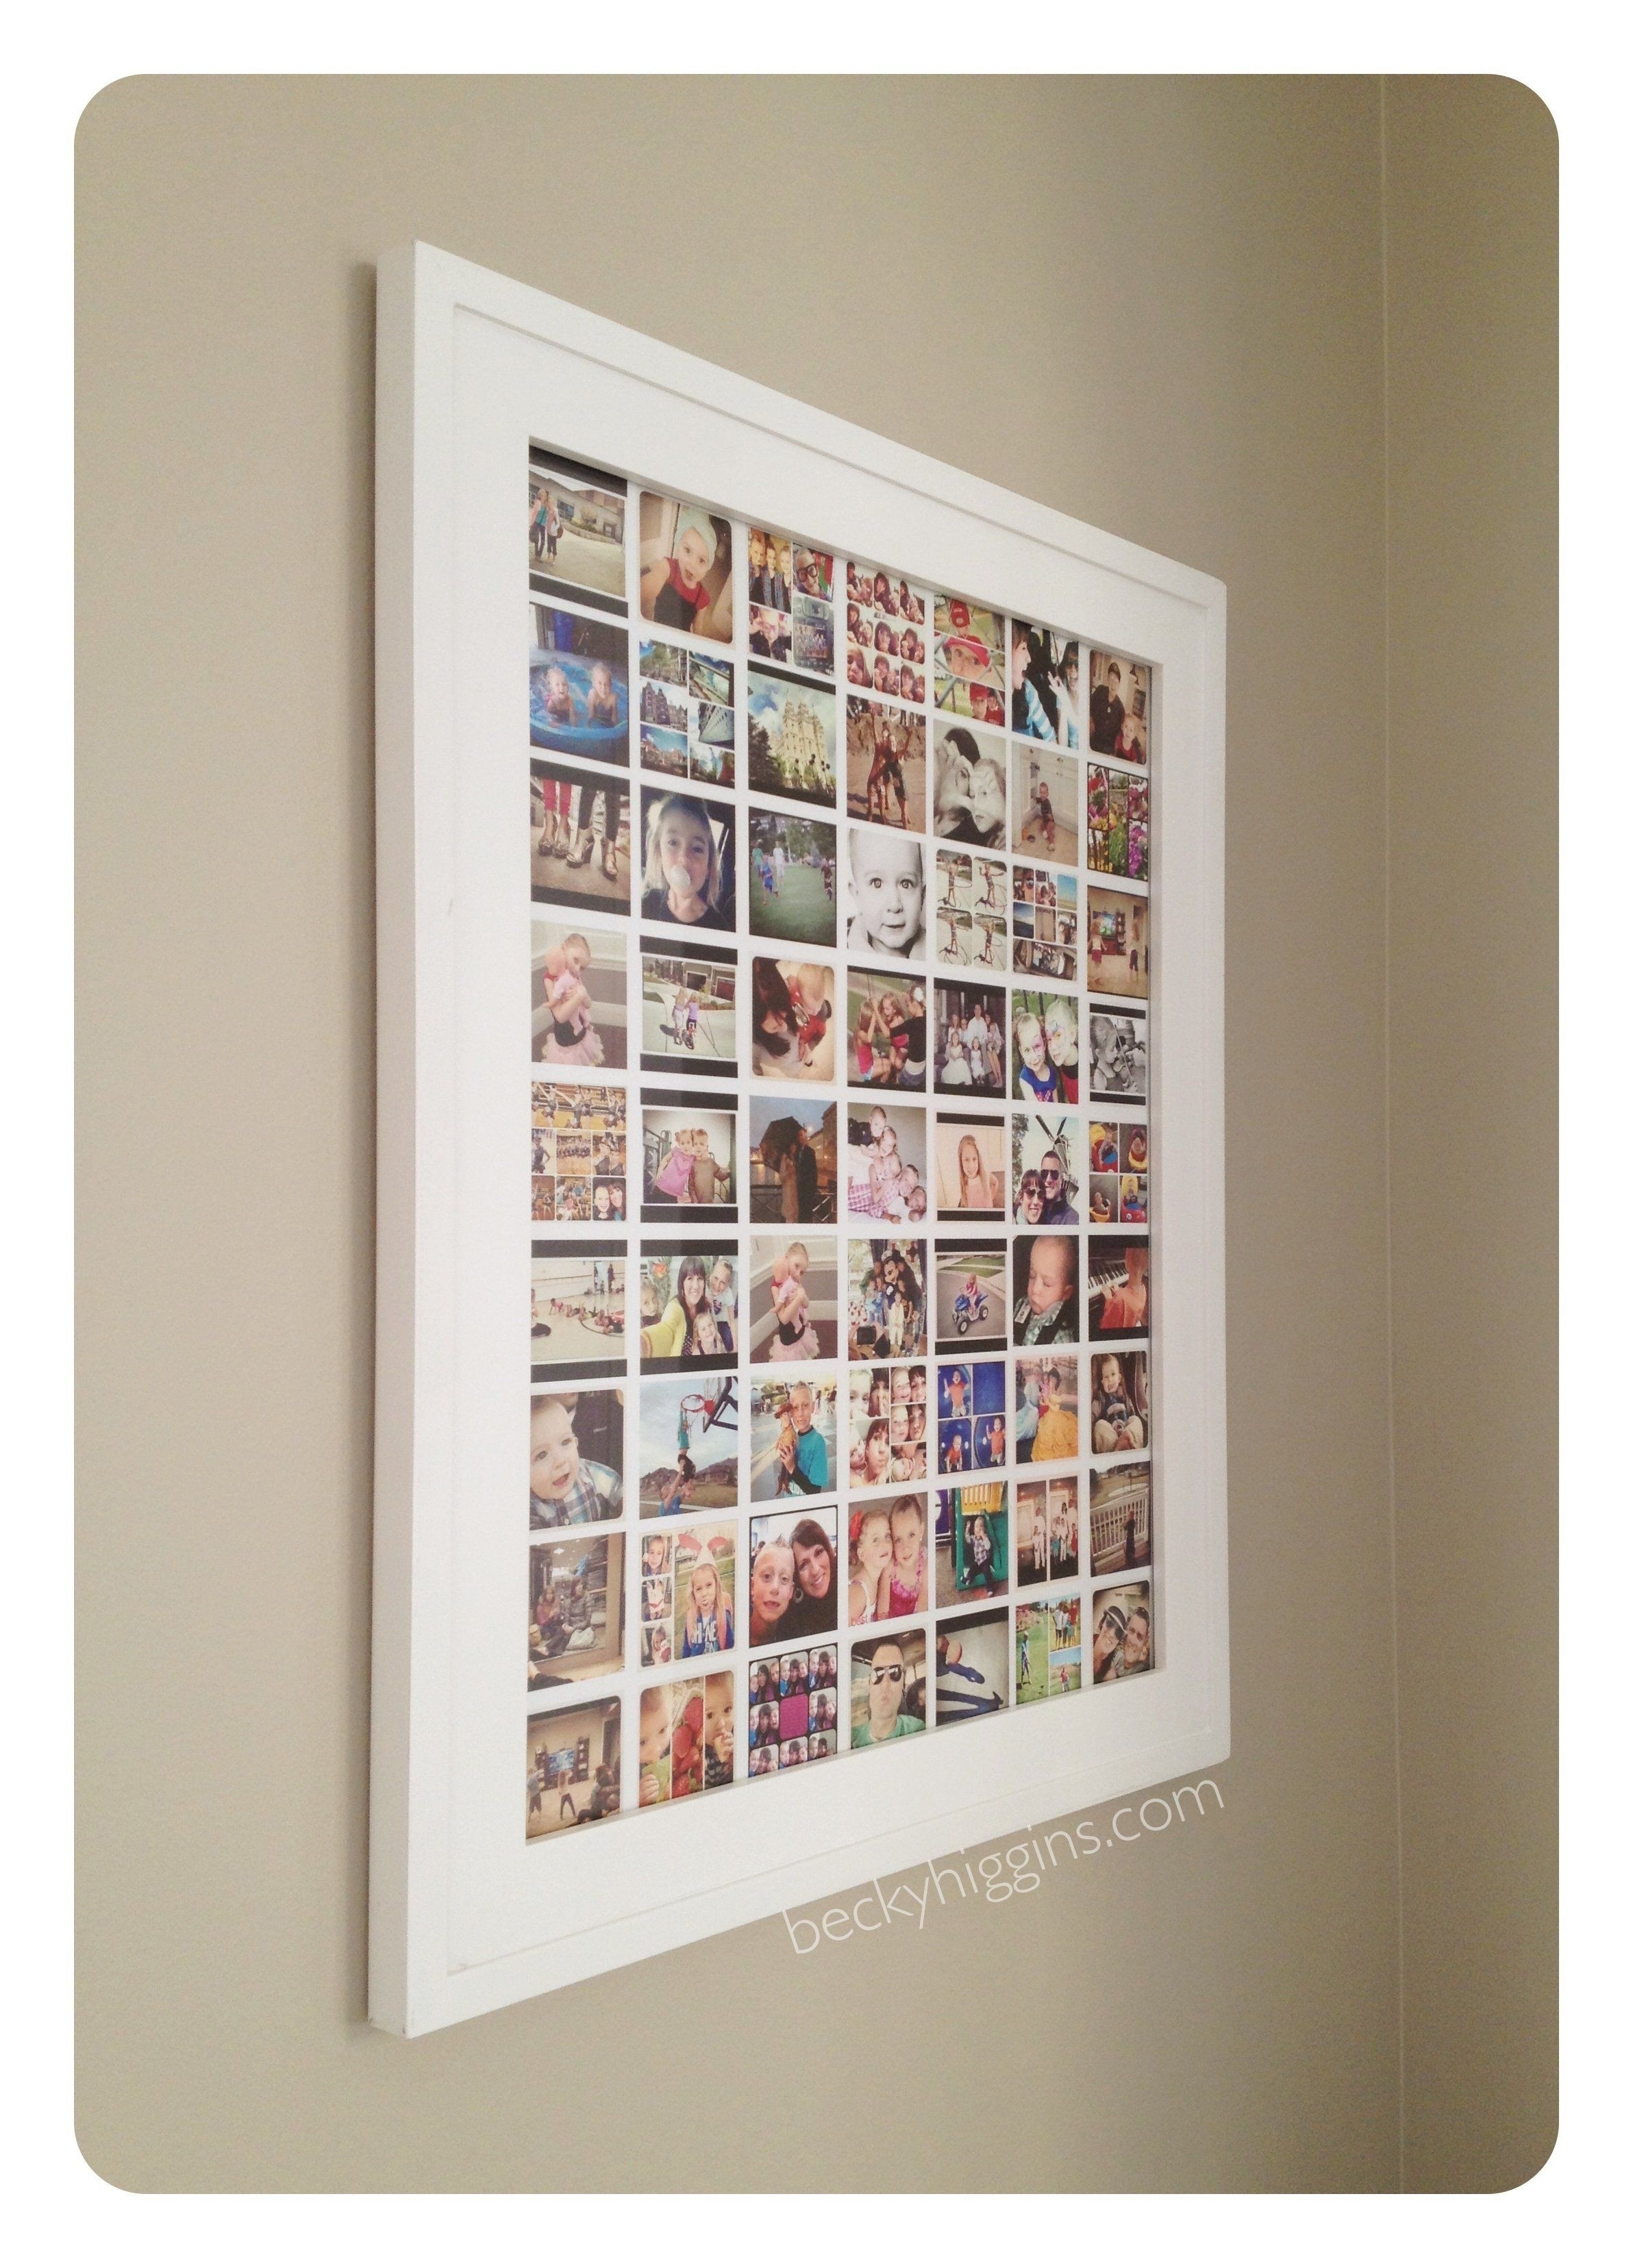 25 Trendy Ways To Use Empty Frames In Home Decor - DigsDigs